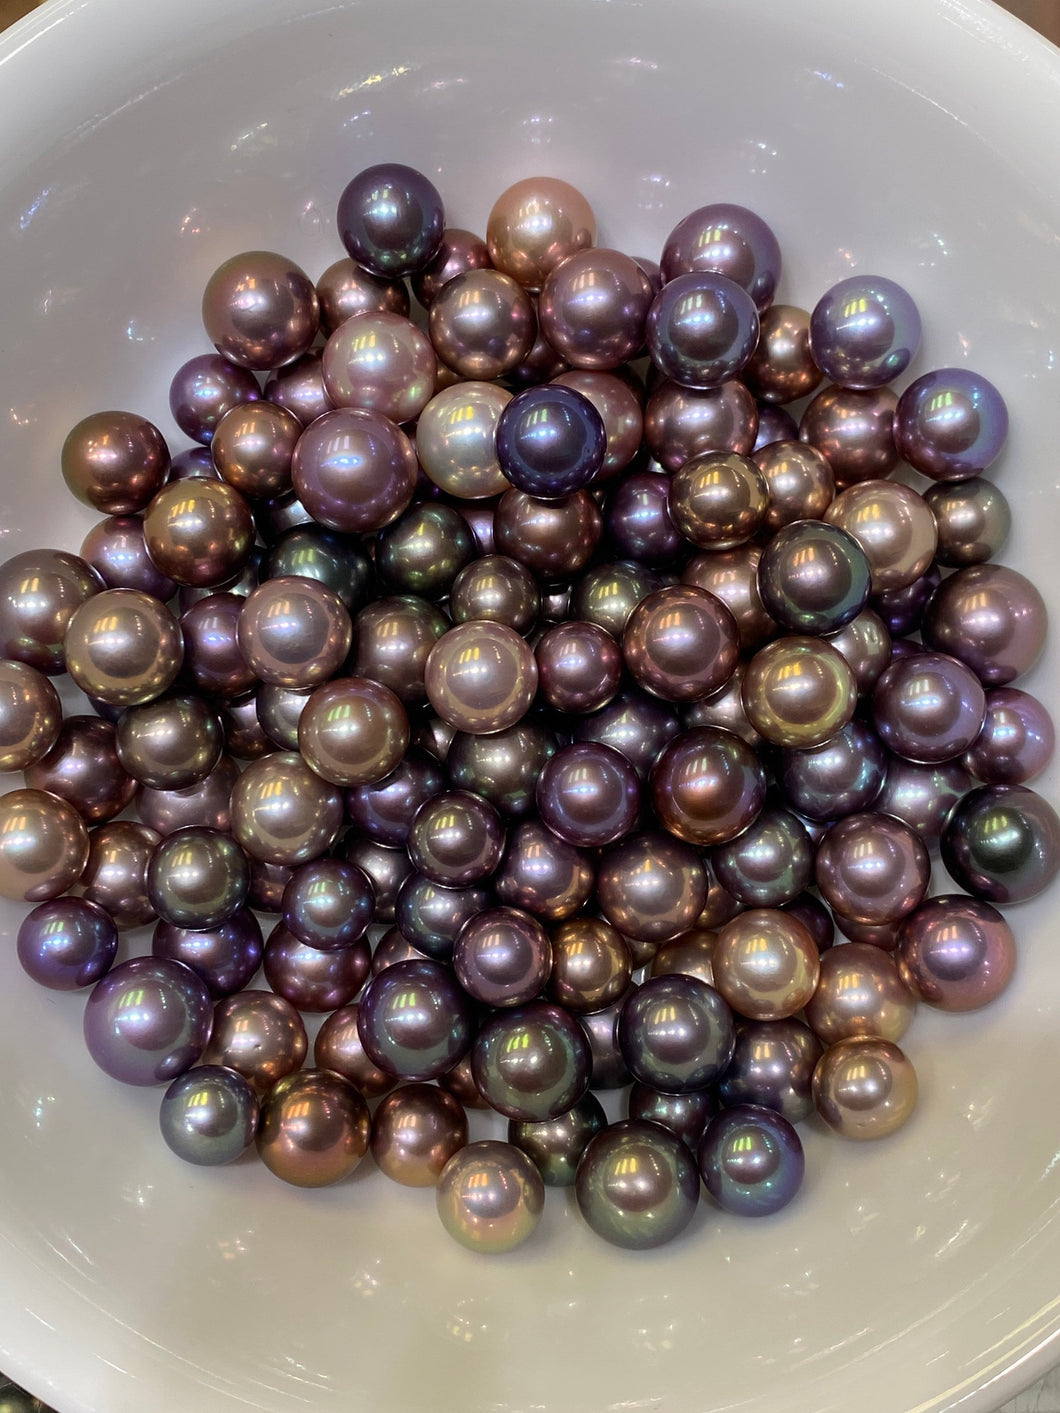 AAAAA Edison Pearls, Top gem, 11-14mm, round, 100% natural colors, high luster